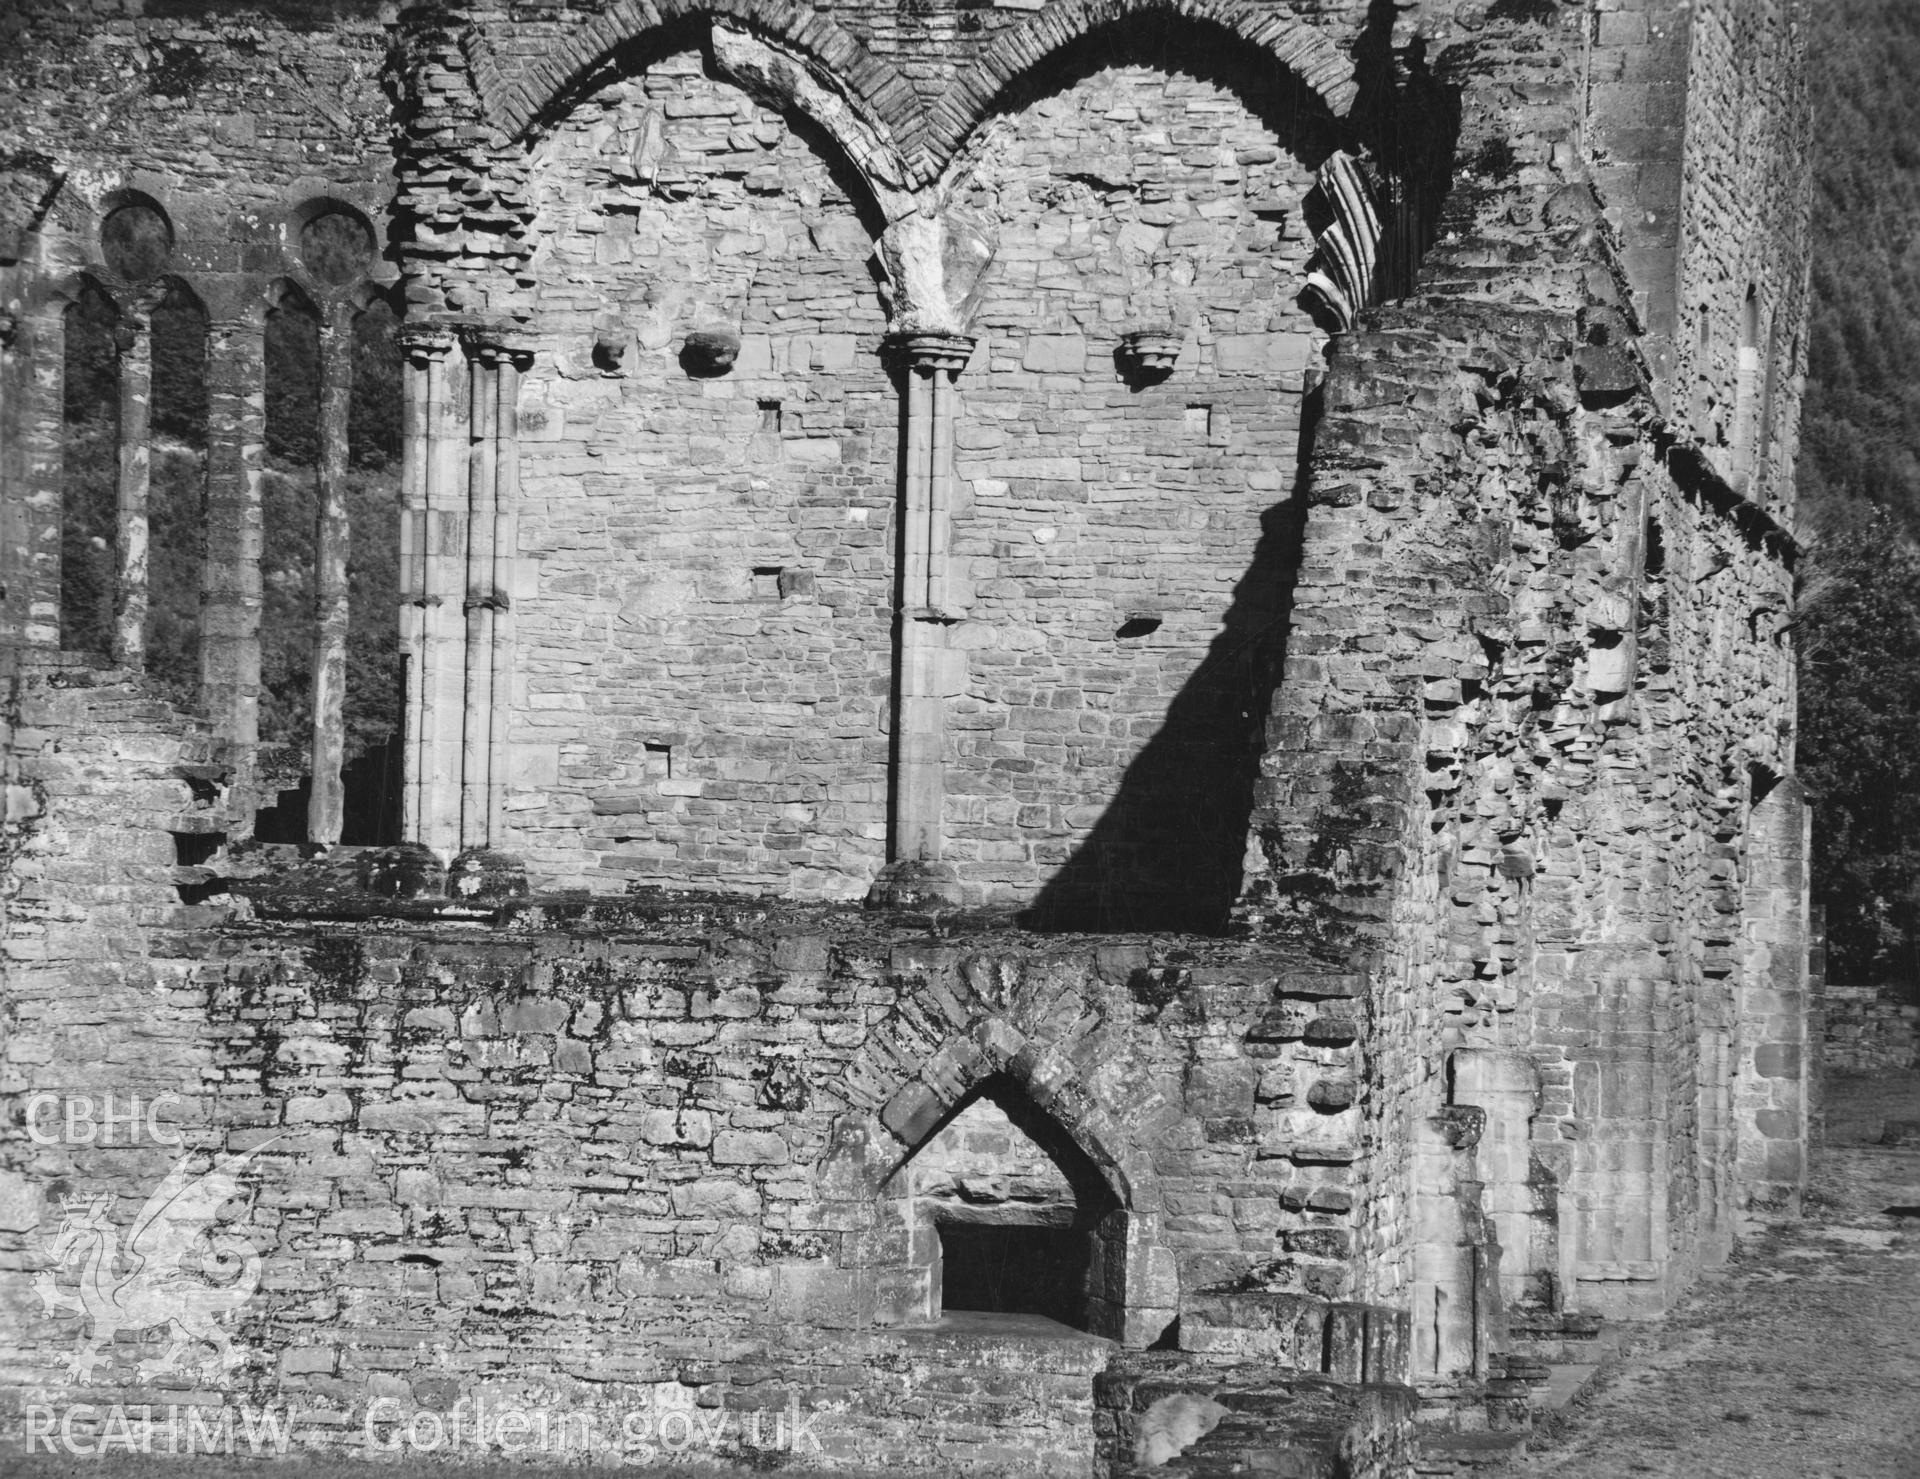 Digital copy of a view of Tintern Abbey taken by Shirley Jones. dated 1943.